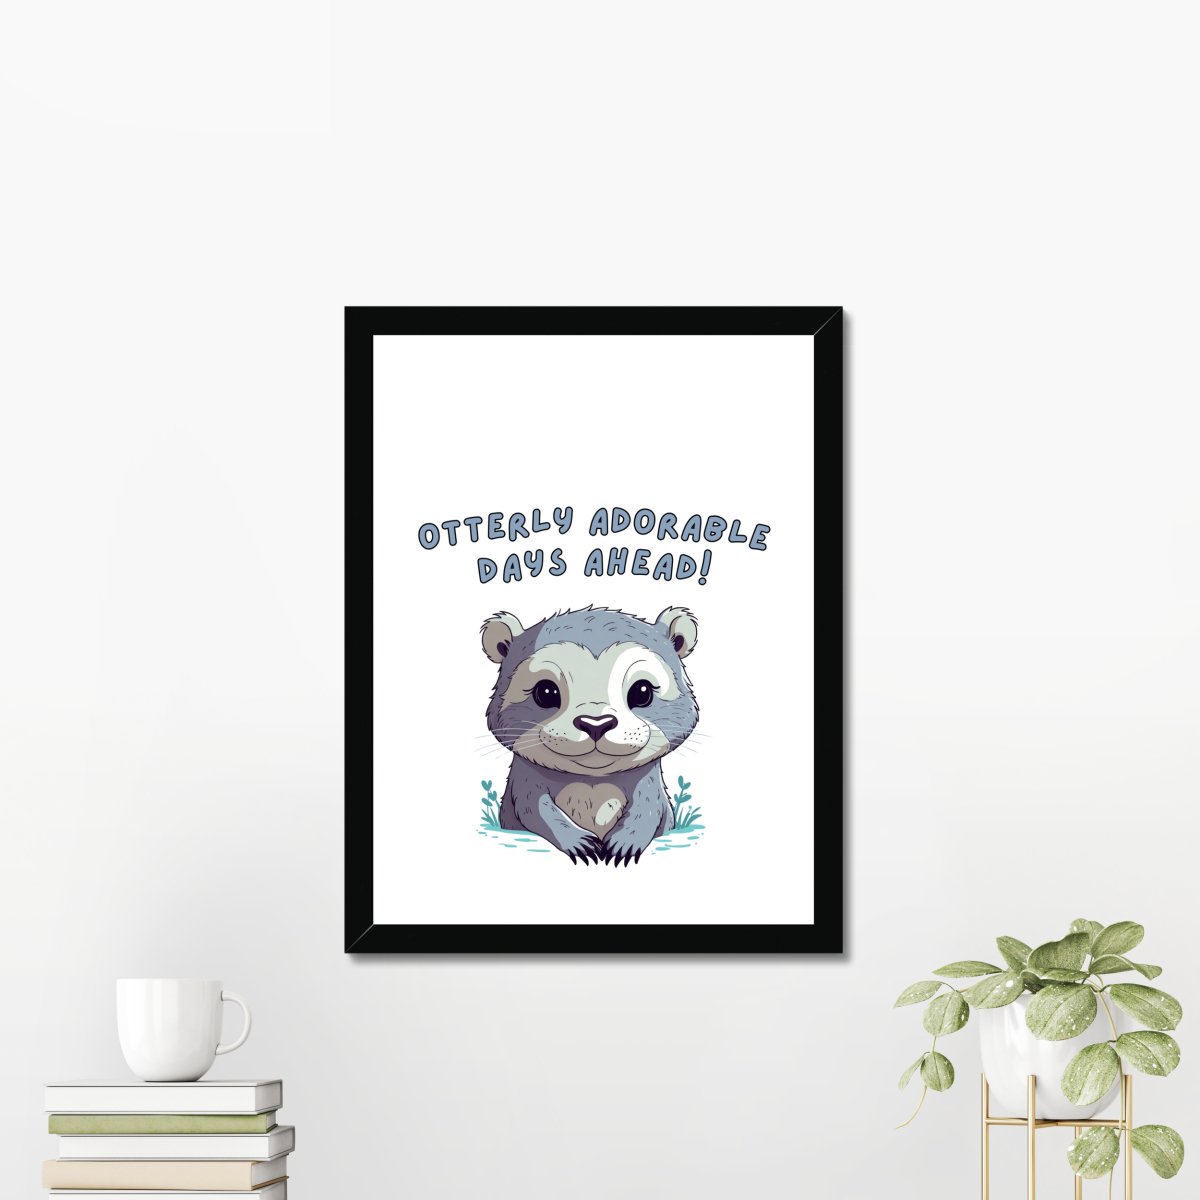 Otterly adorable - Art print - Poster - Ever colorful